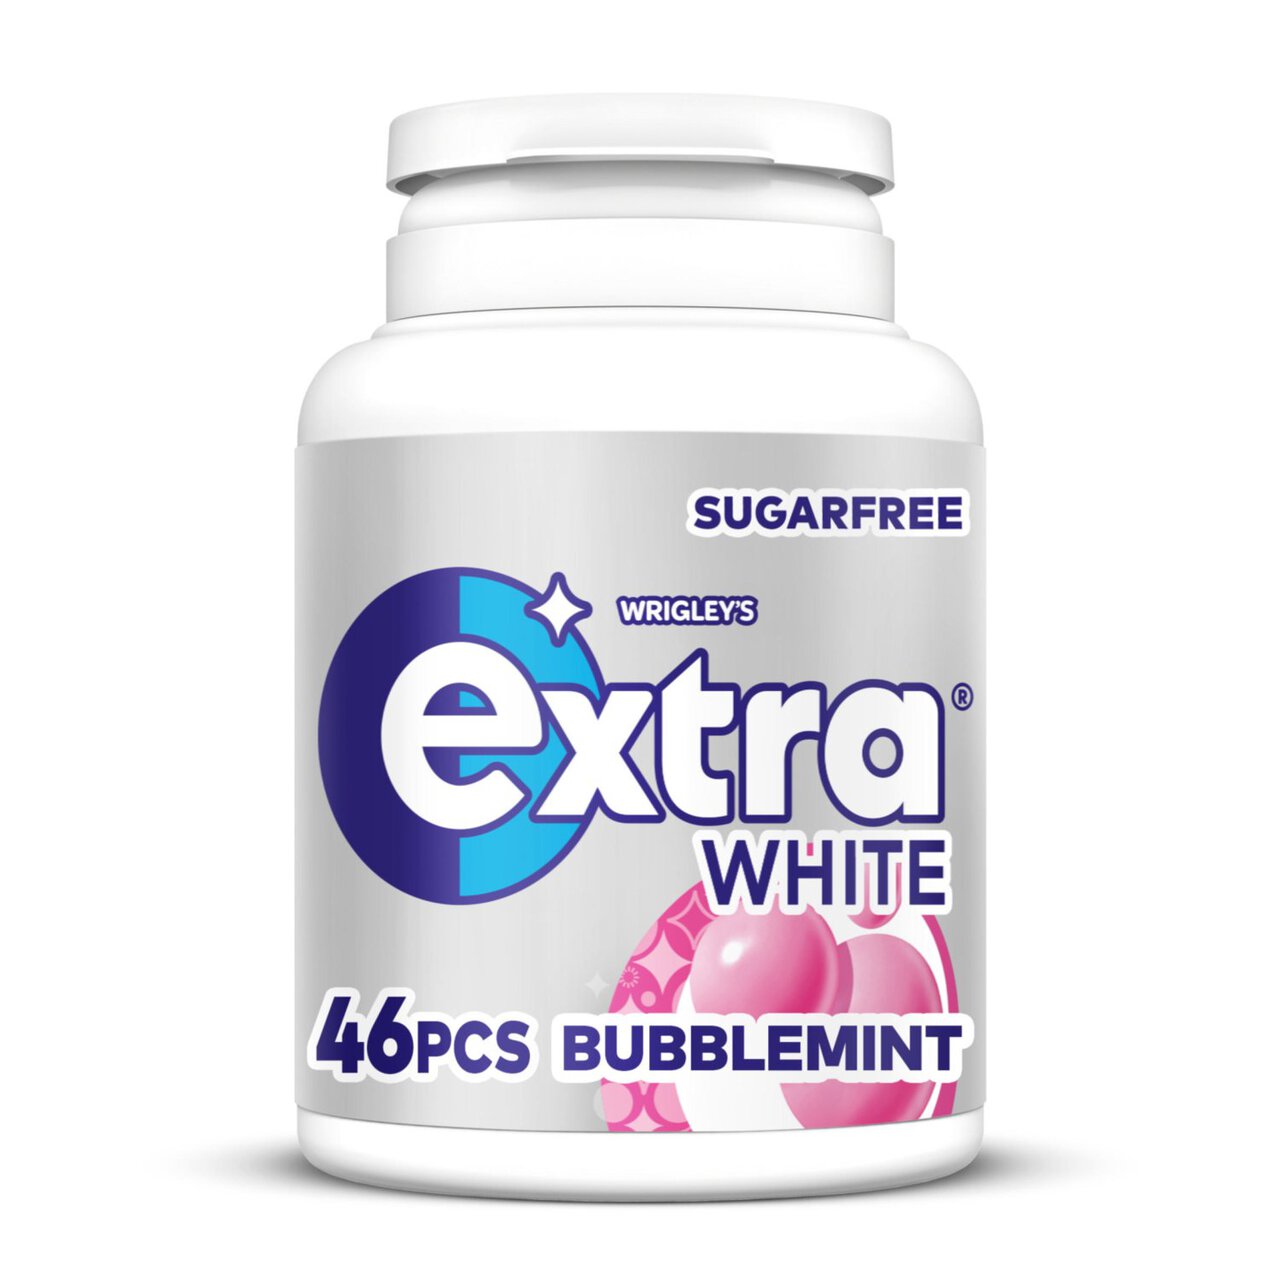 Extra Bubblemint Sugarfree Chewing Gum Bottle 46 per pack